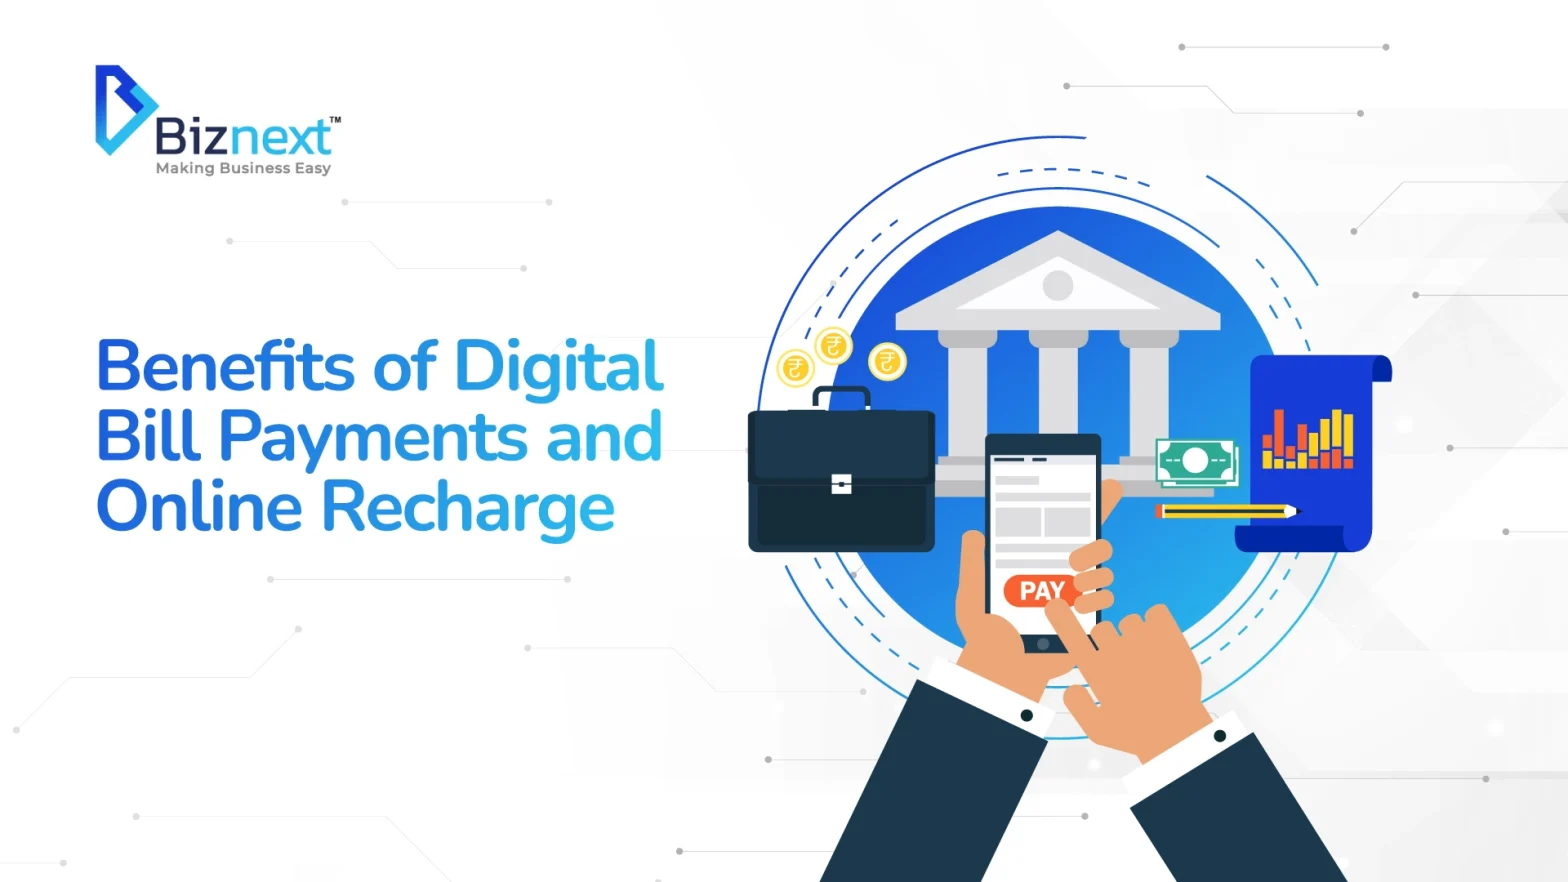 Benefits of Digital Bill Payments and Online Recharge